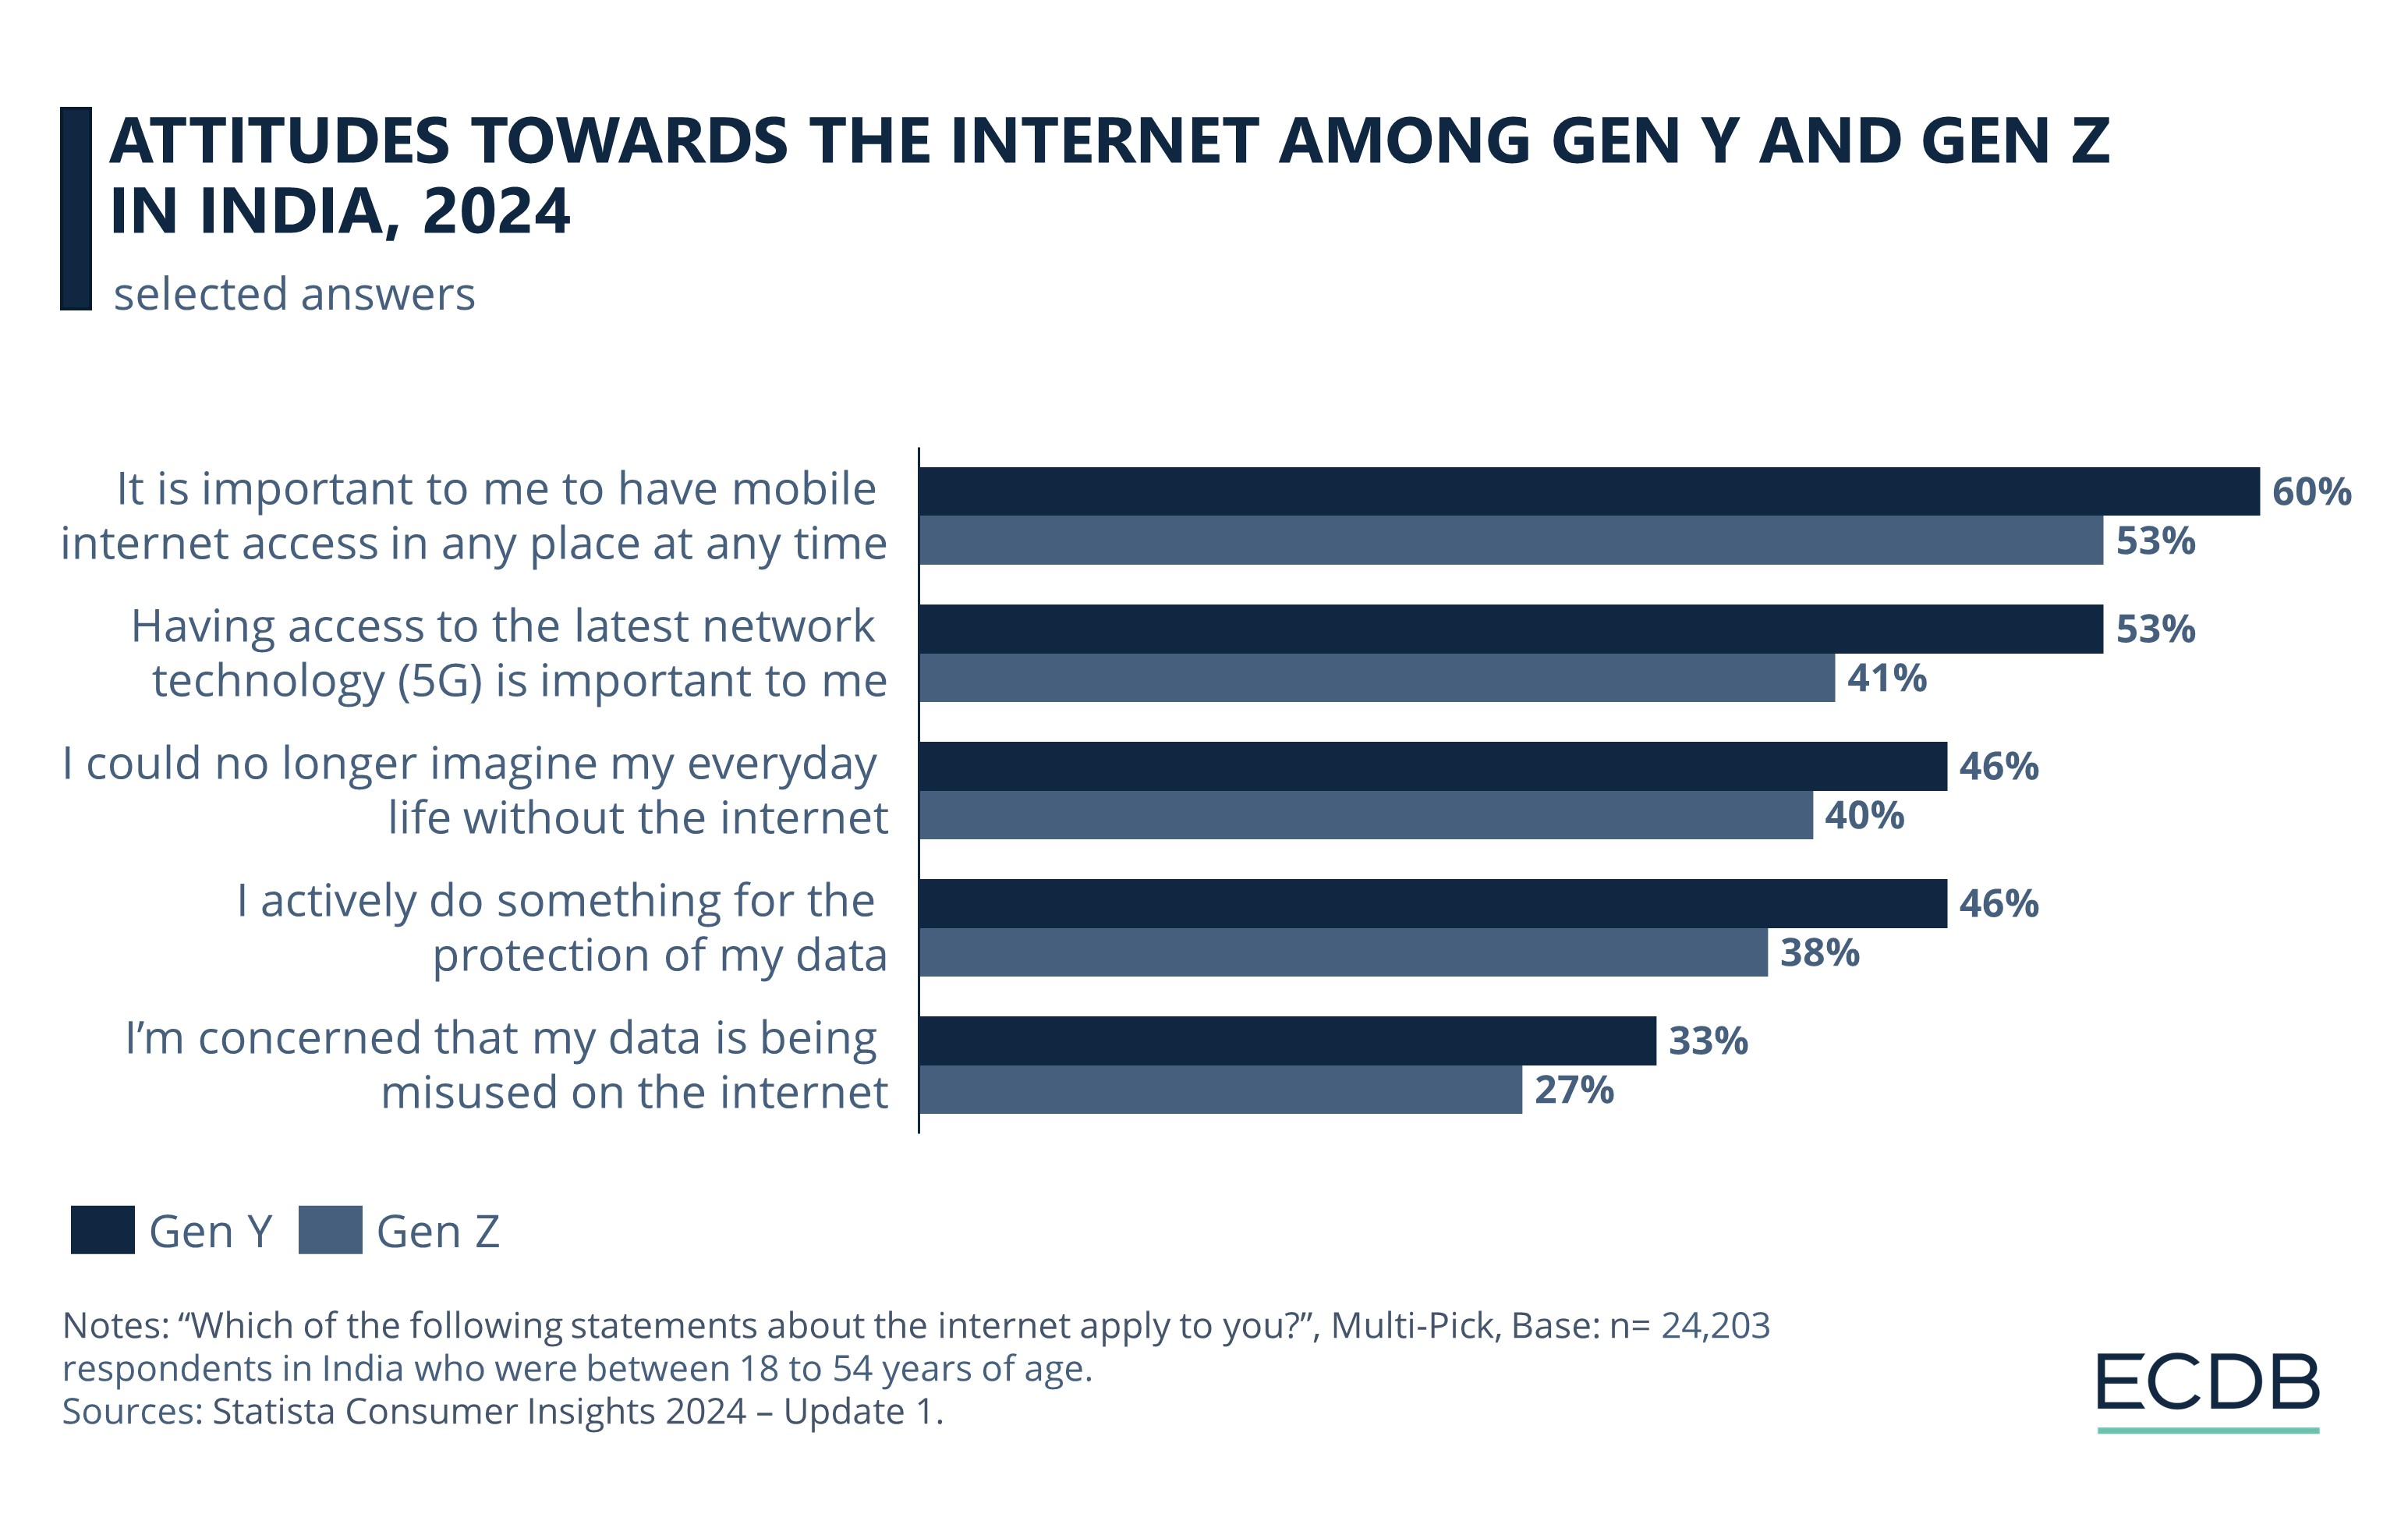 Attitudes Towards the Internet Among Gen Y And Gen Z in India, 2024